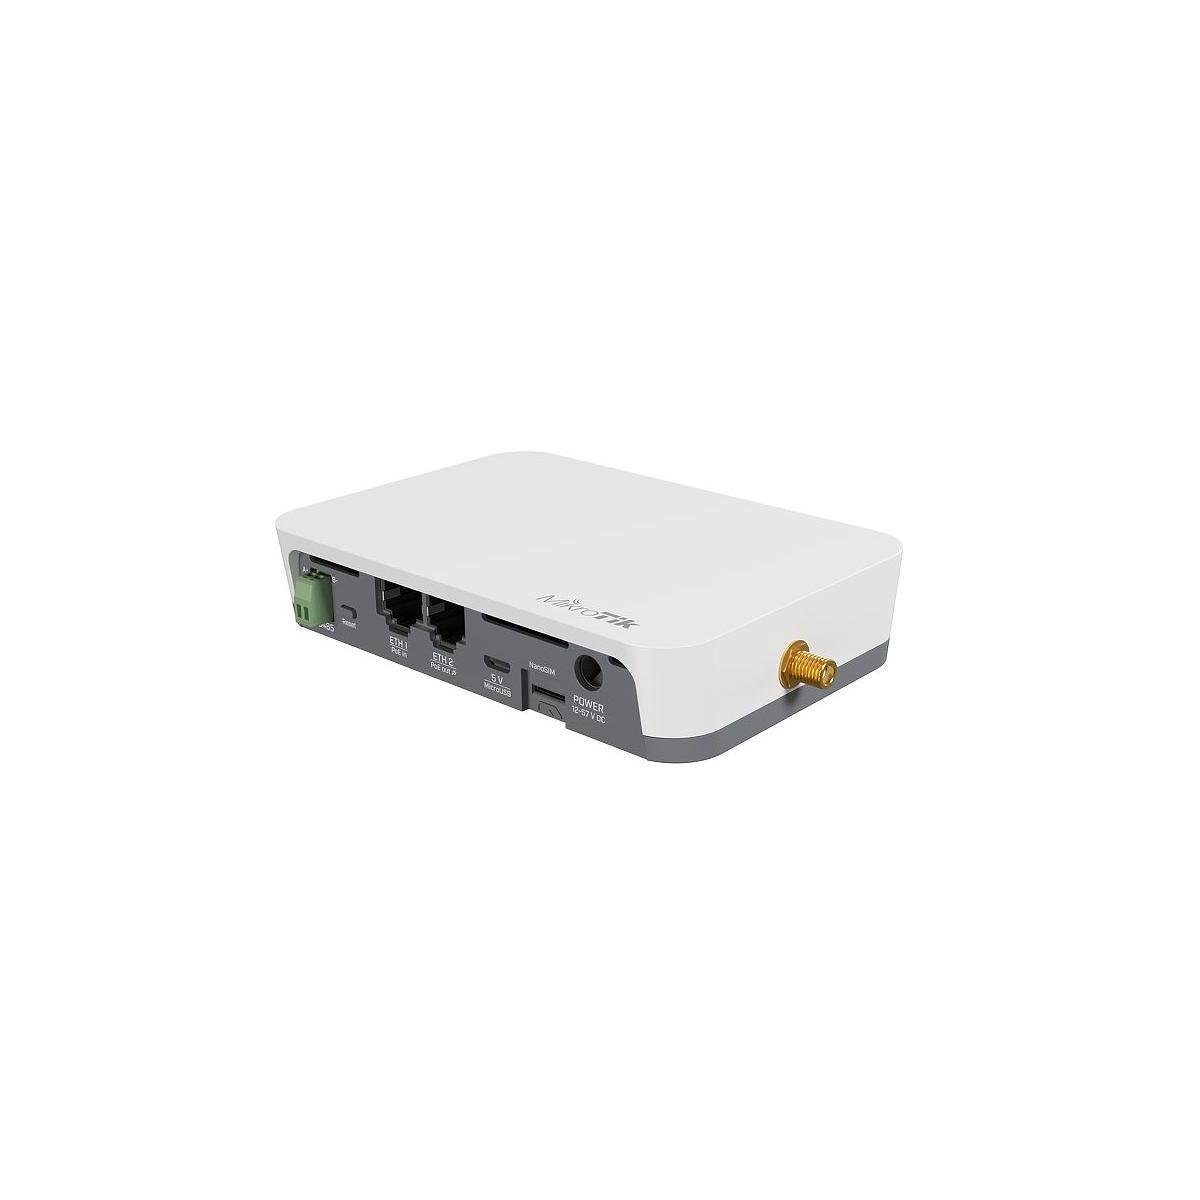 MikroTik RB924IR-2ND-BT5&BG77&R11E-LR8 - KNOT LR8-Kit,... 4G/LTE-Router